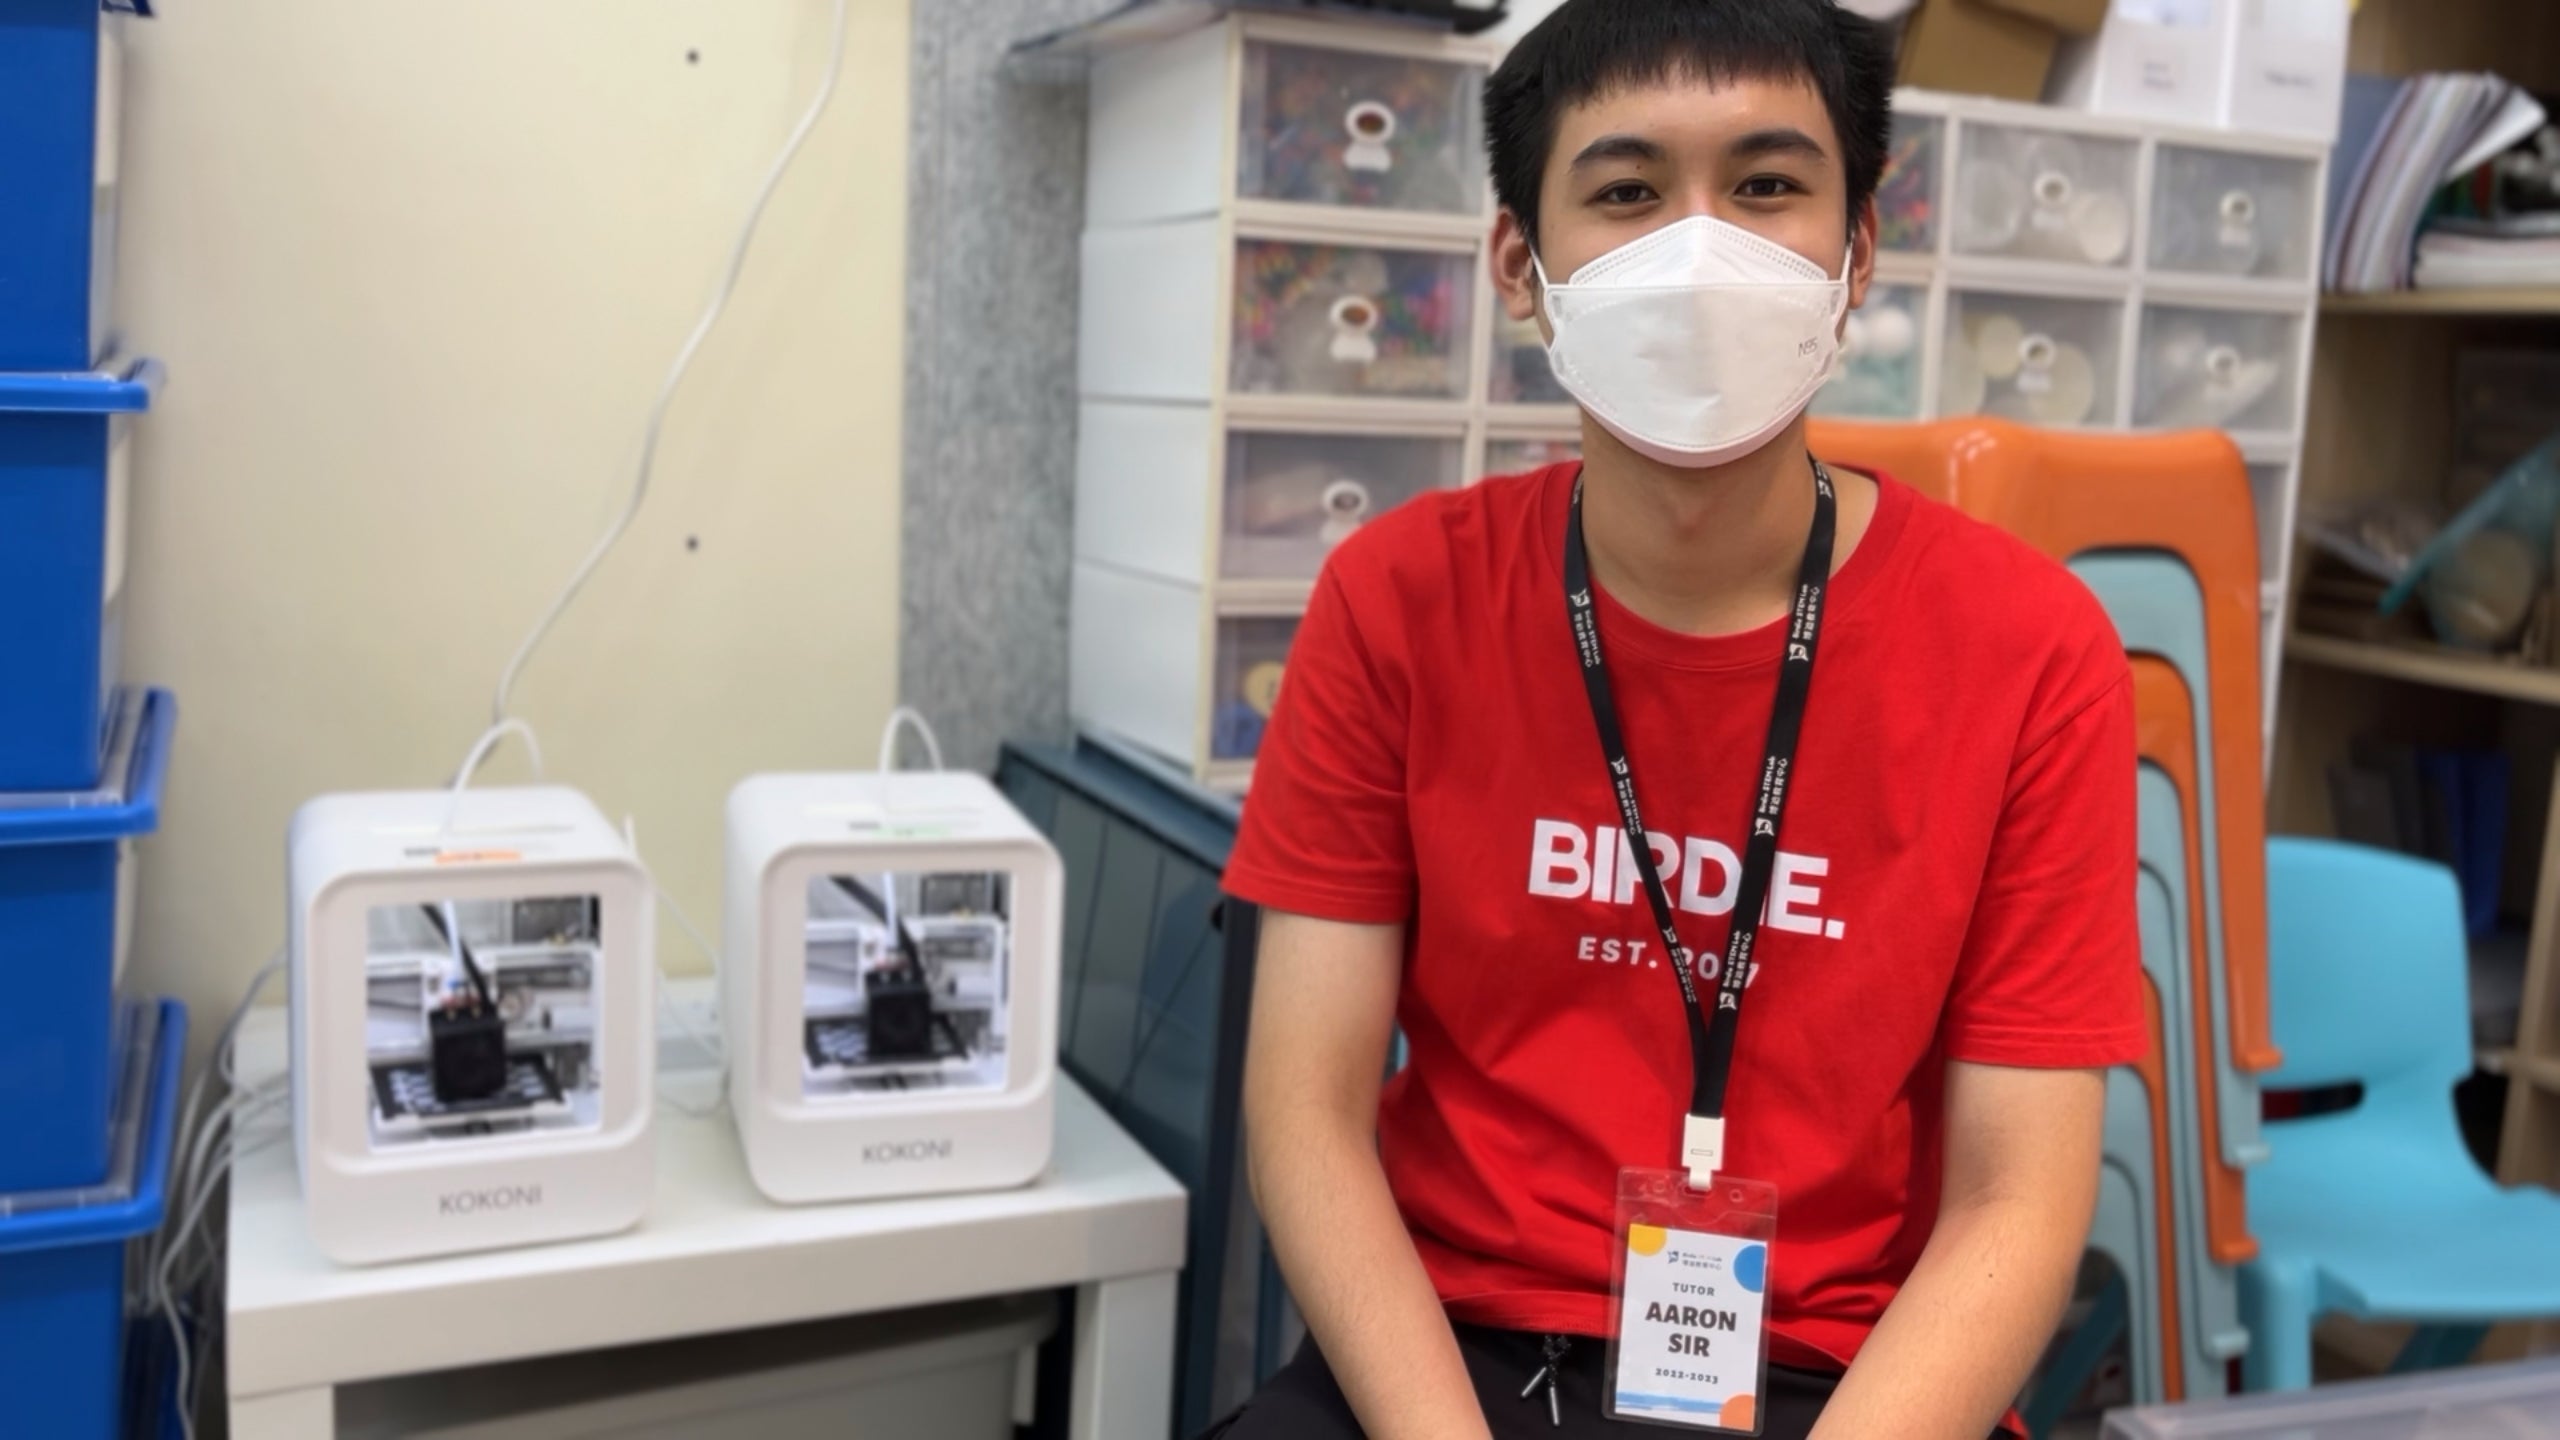 "I was impressed by how much the students’ creativity and problem-solving skills improved during this 3D printing class”  Arron, Tutor of Birdie STEM Lab.